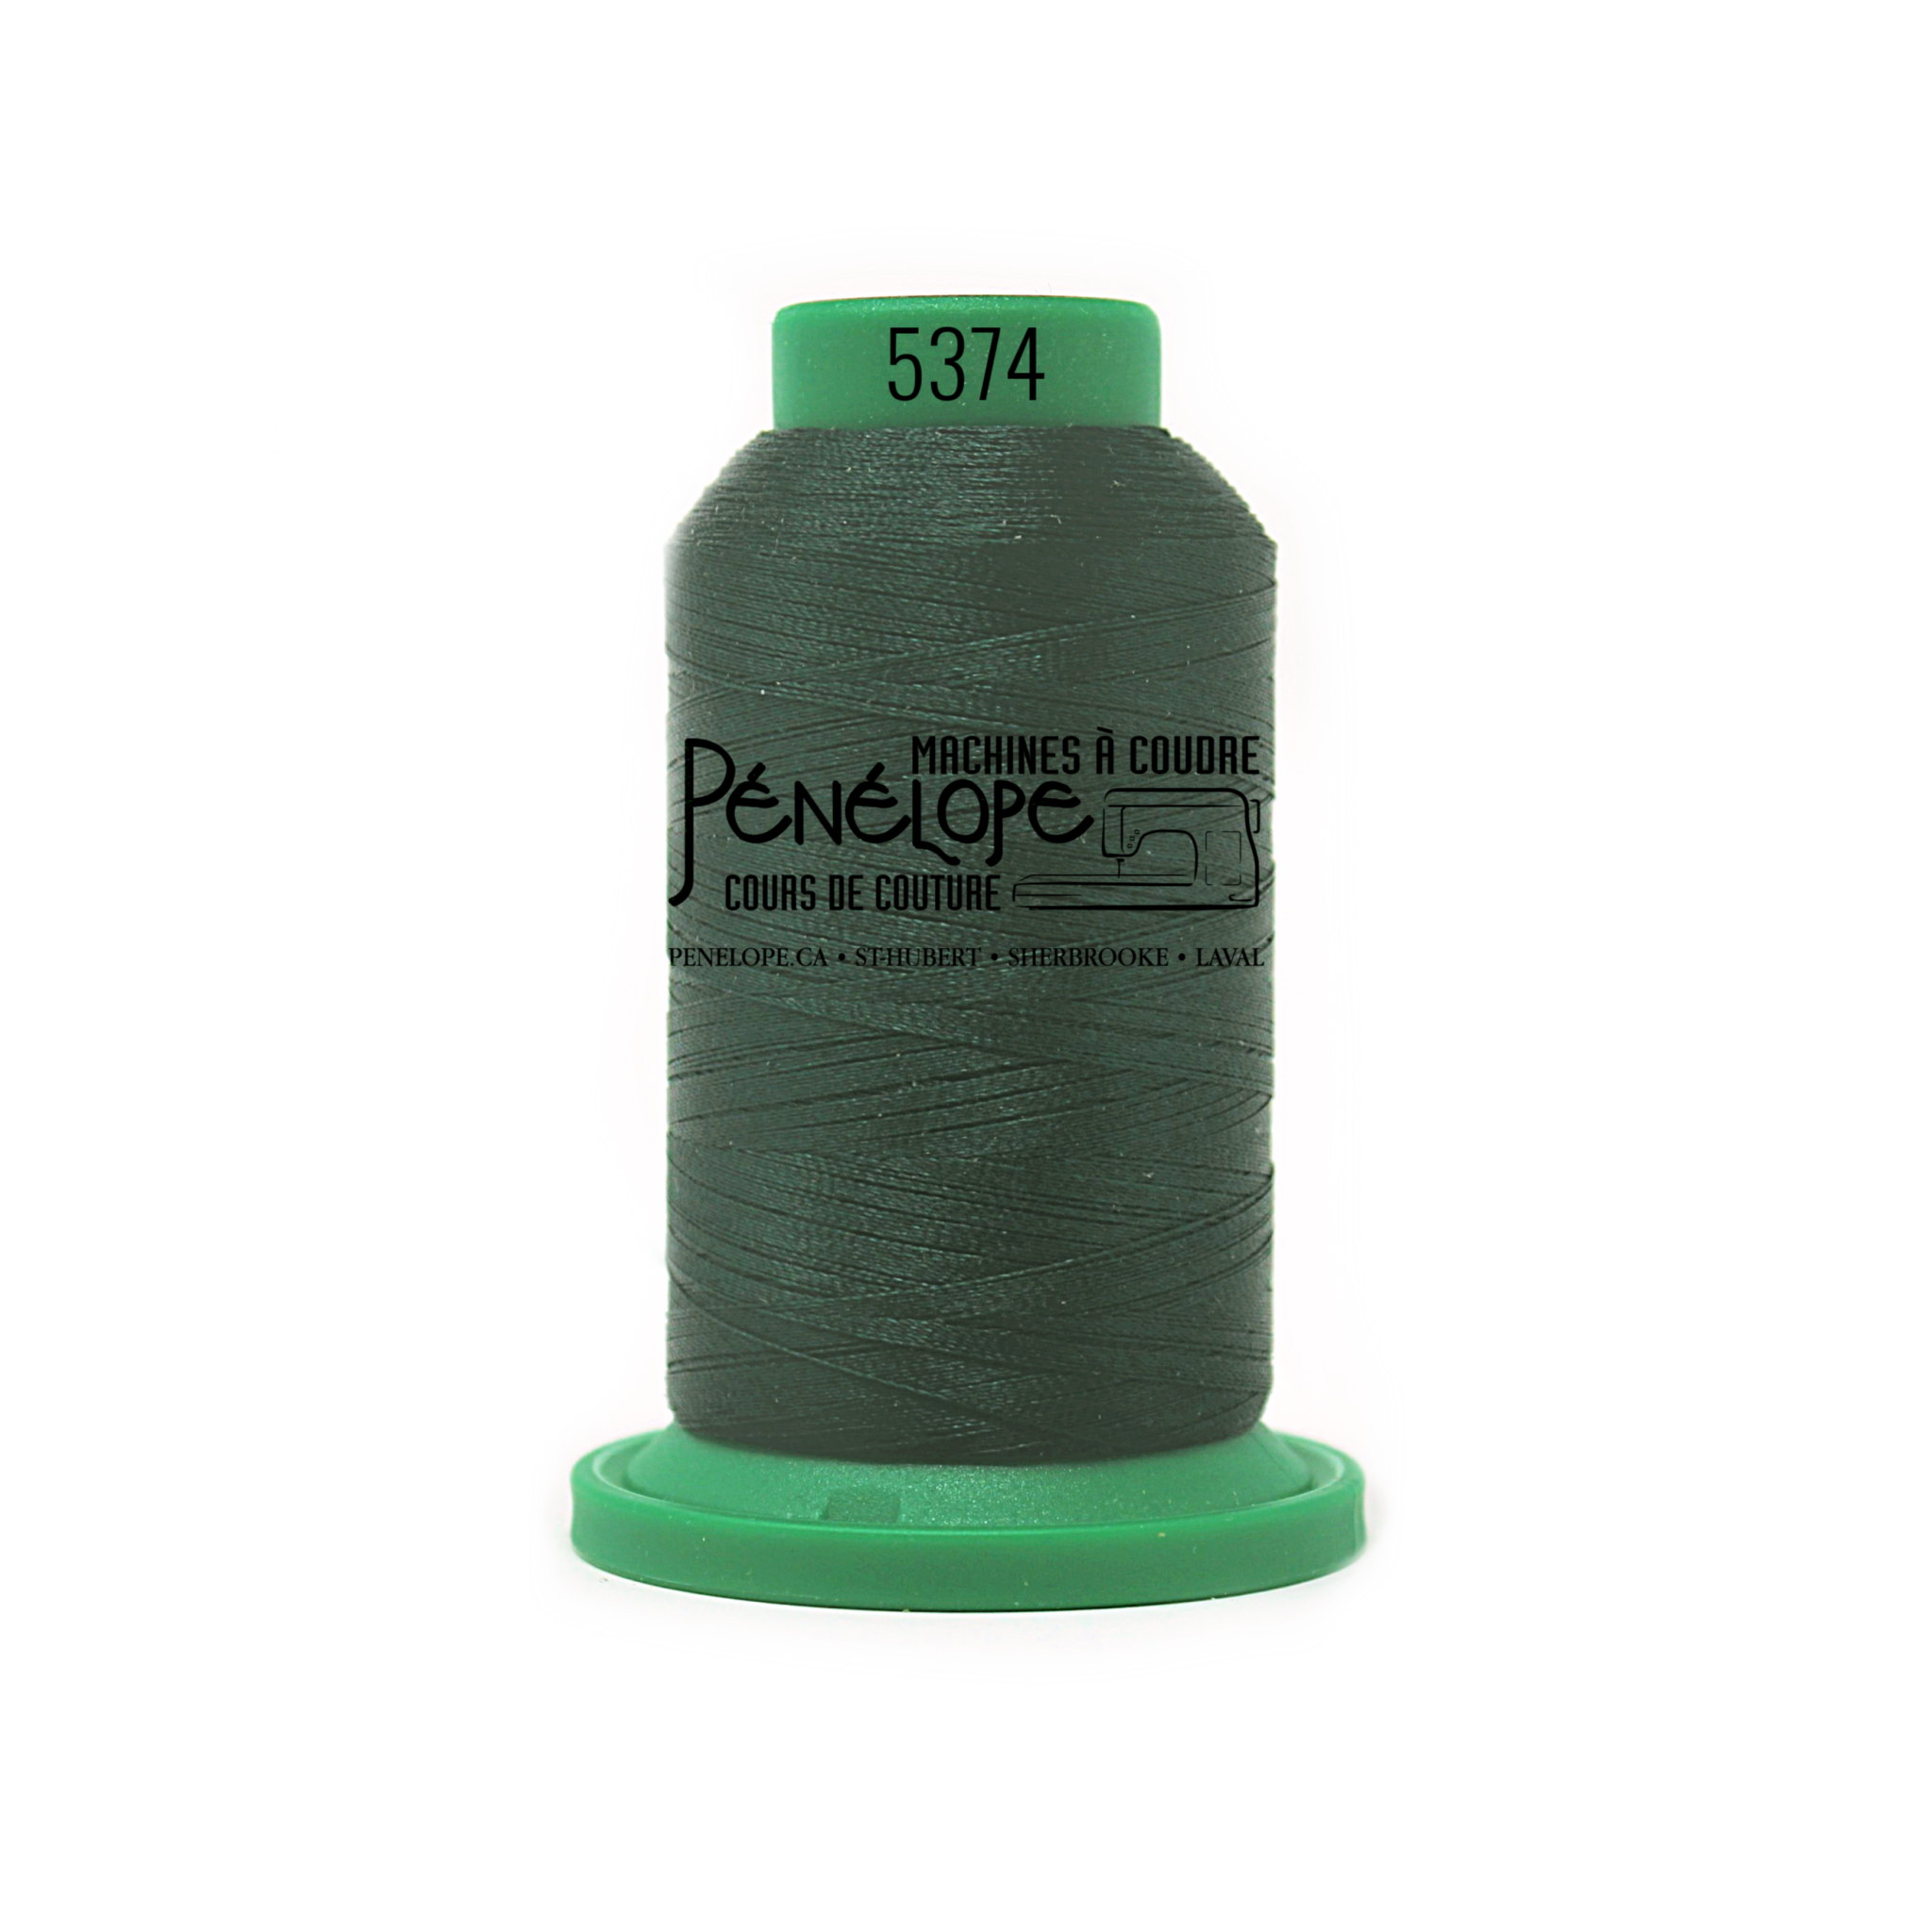 Isacord Isacord sewing and embroidery thread 5374